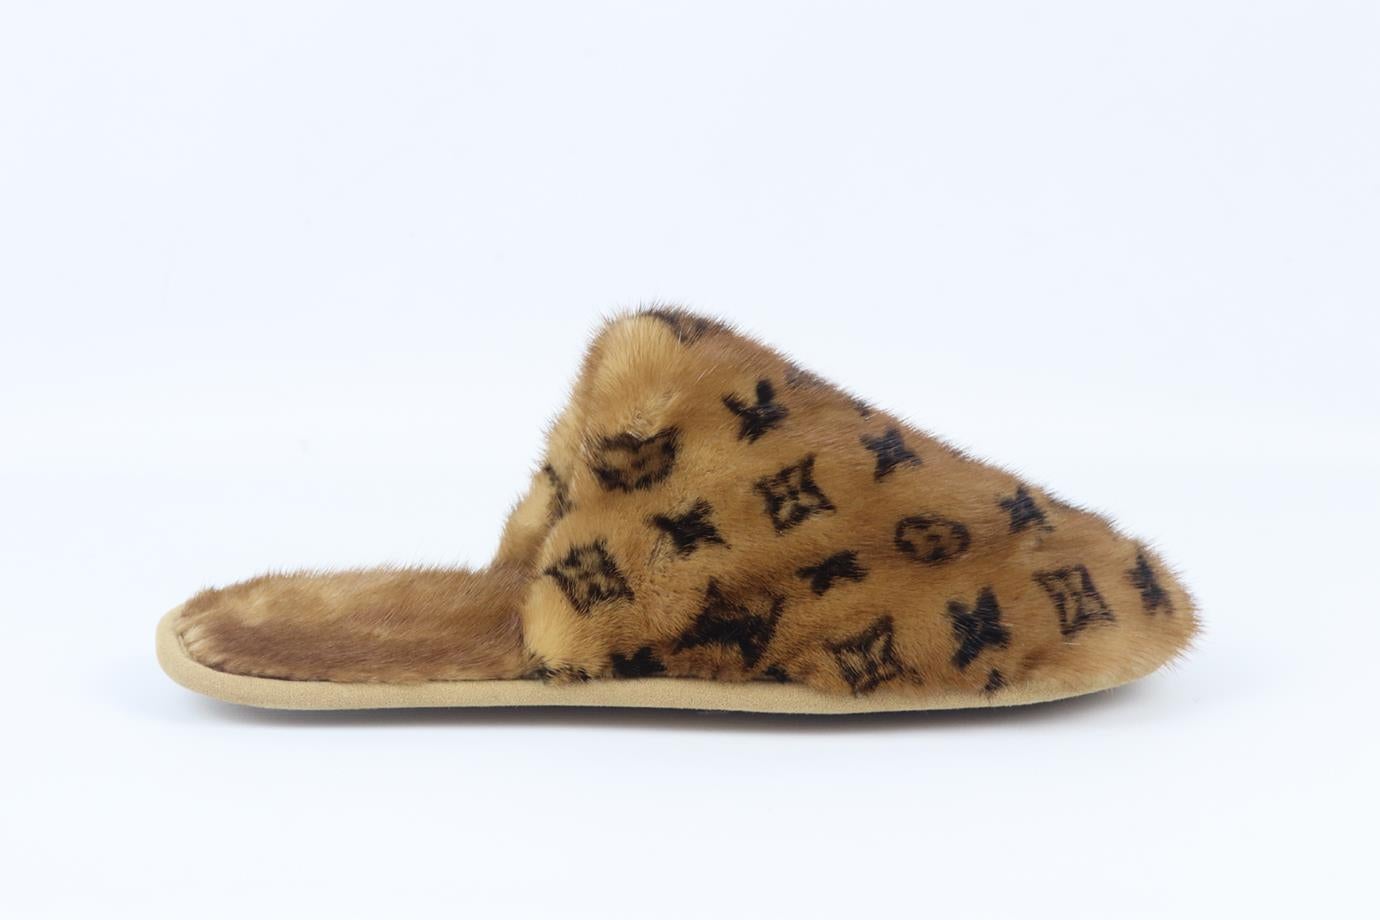 Louis Vuitton monogrammed mink fur slippers. Brown and black. Slip on. Does not come with dustbag or box. Size: EU 38-39 (UK 5-6, US 8-9). Insole: 10.2 in. New without box